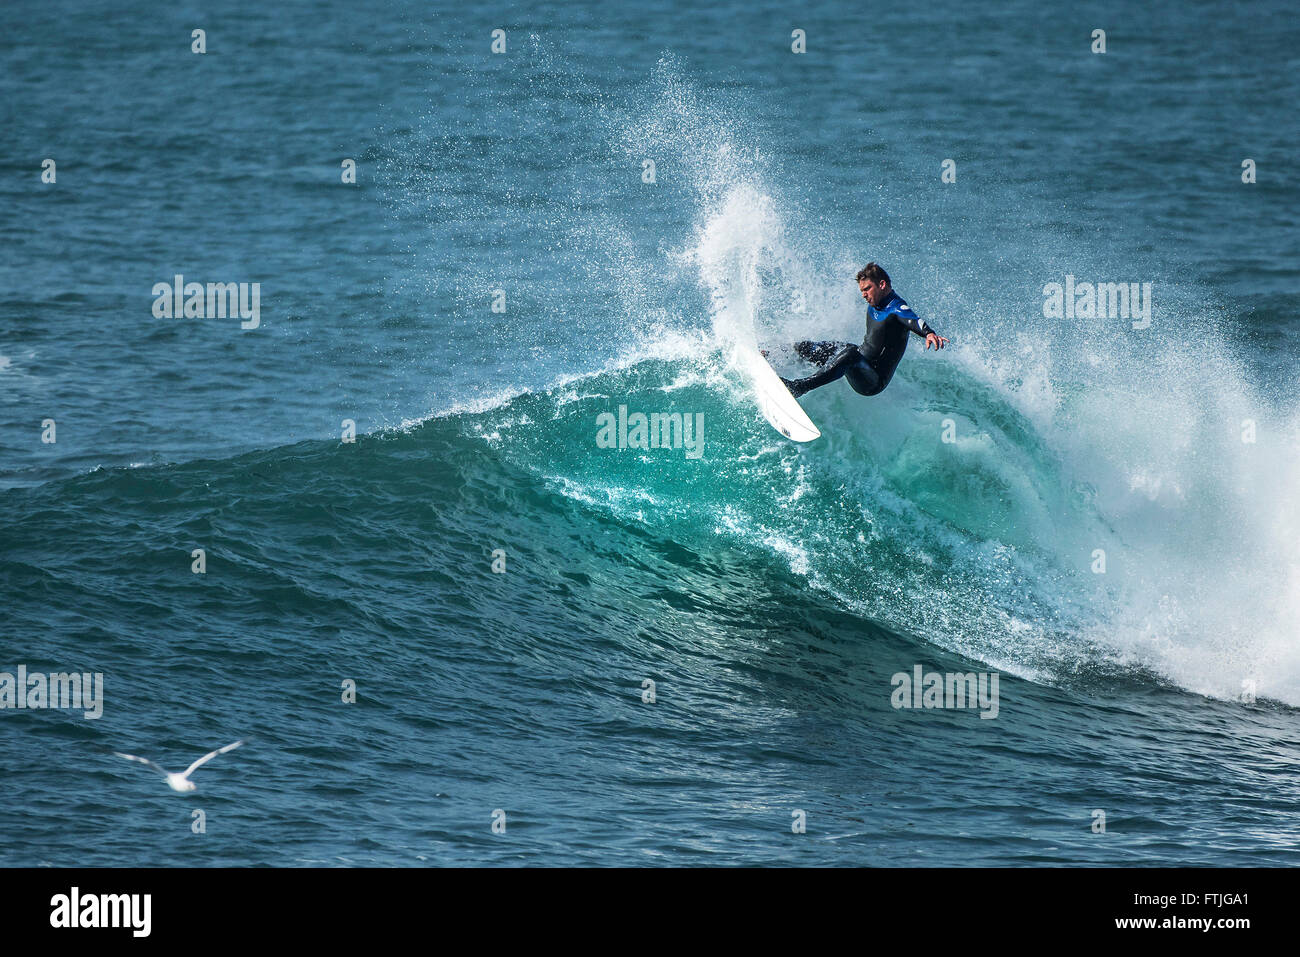 A surfer in spectacular action riding a wave at Porthleven in Cornwall, England. Stock Photo